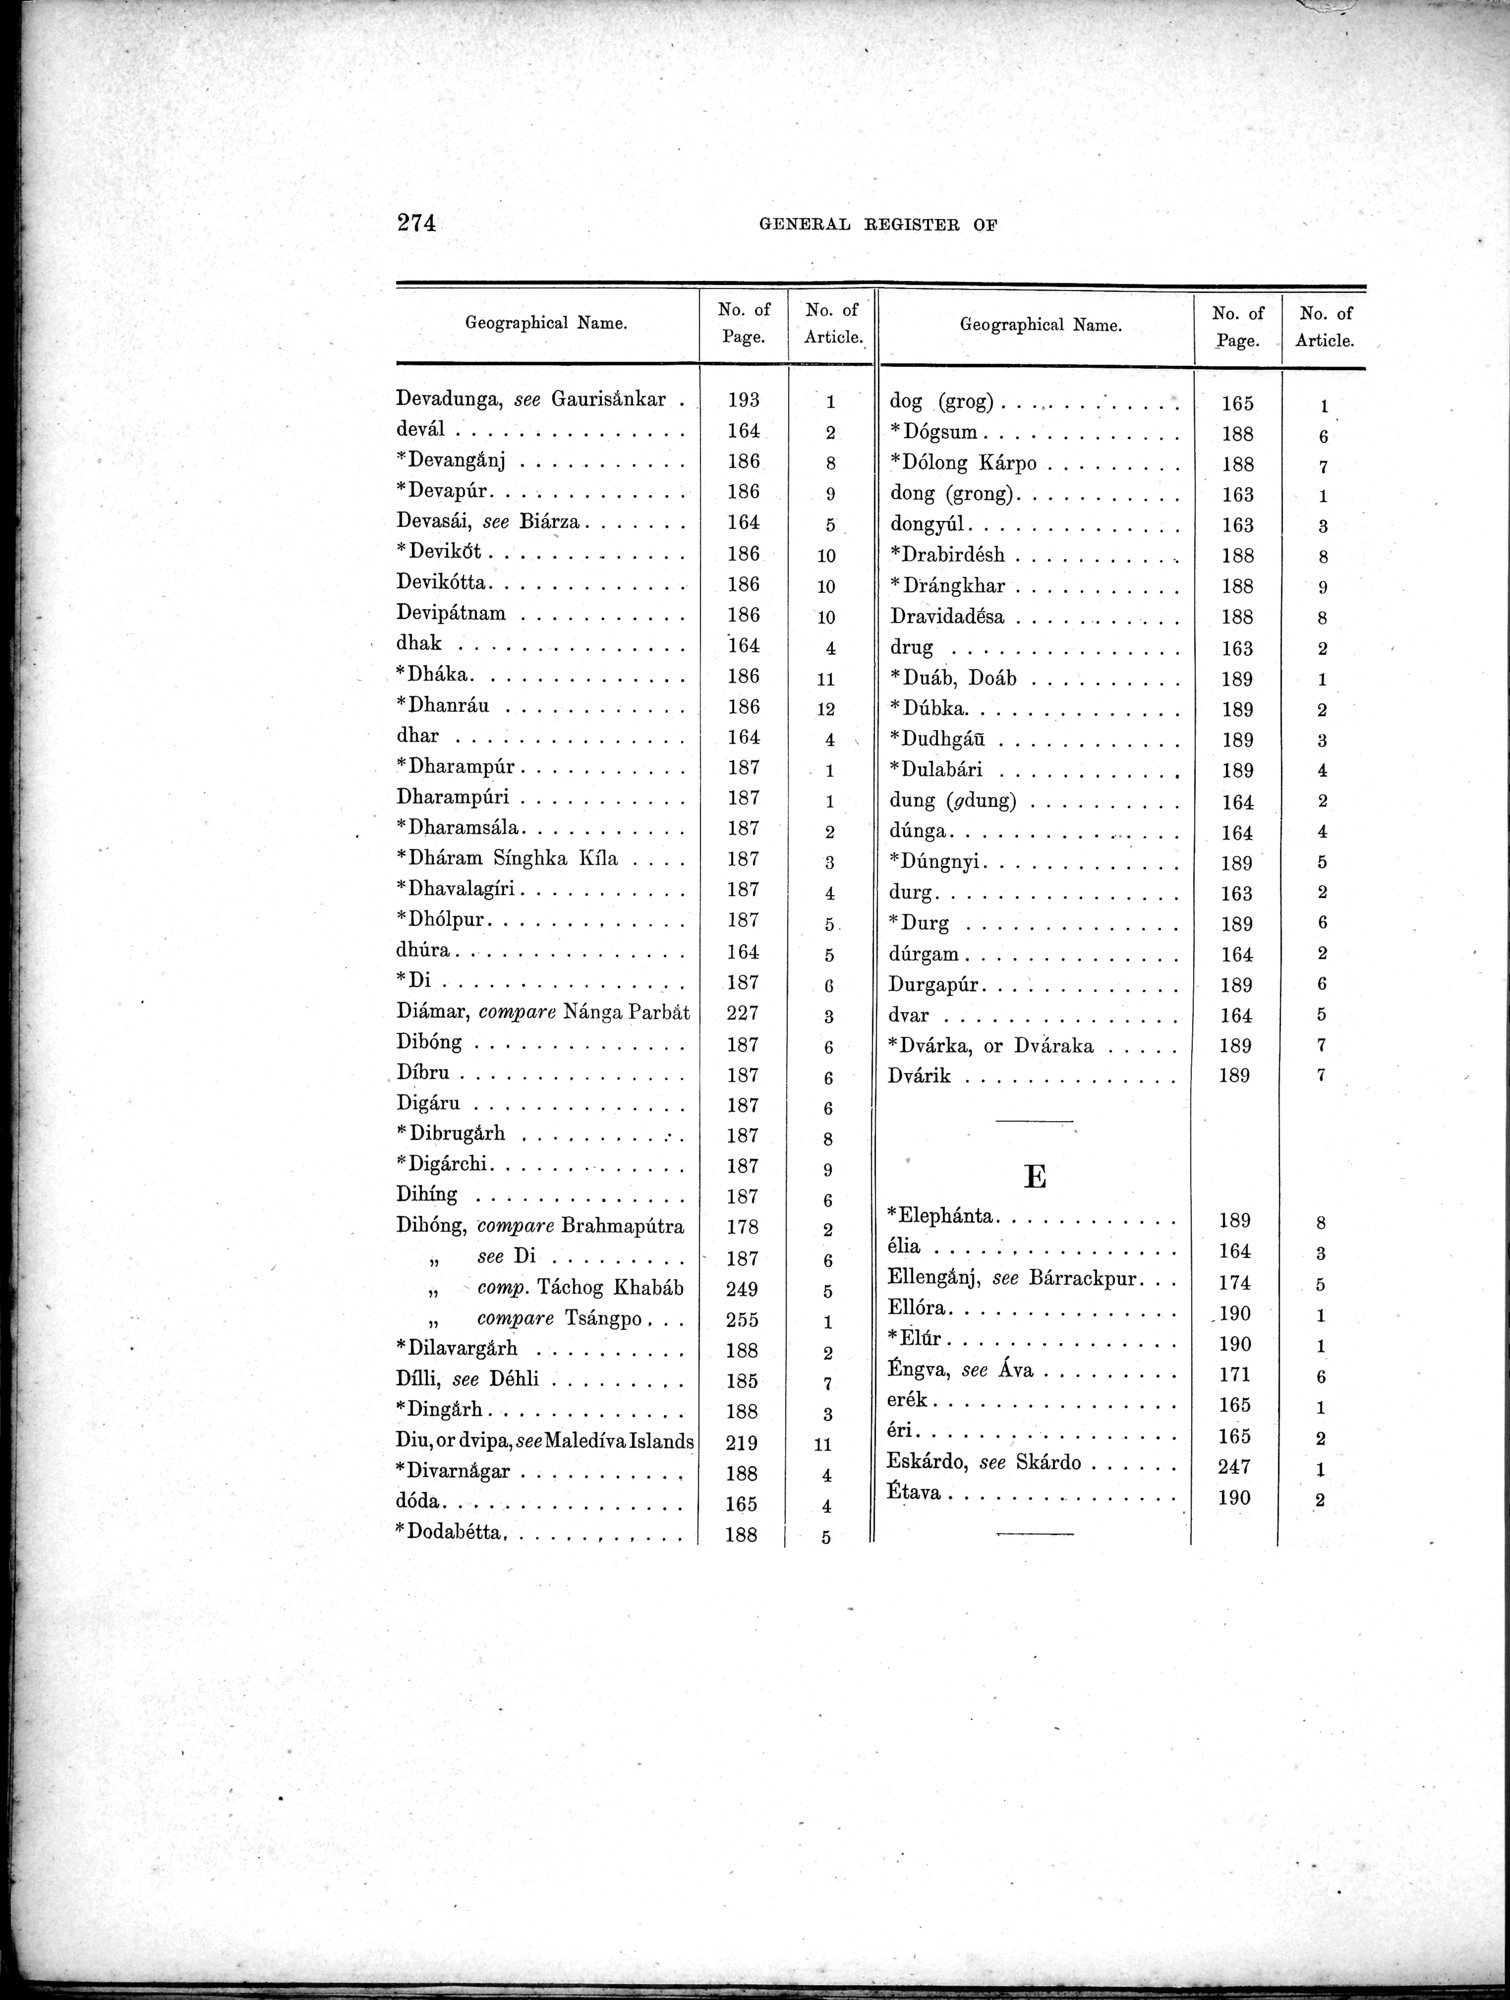 Results of a Scientific Mission to India and High Asia : vol.3 / Page 306 (Grayscale High Resolution Image)